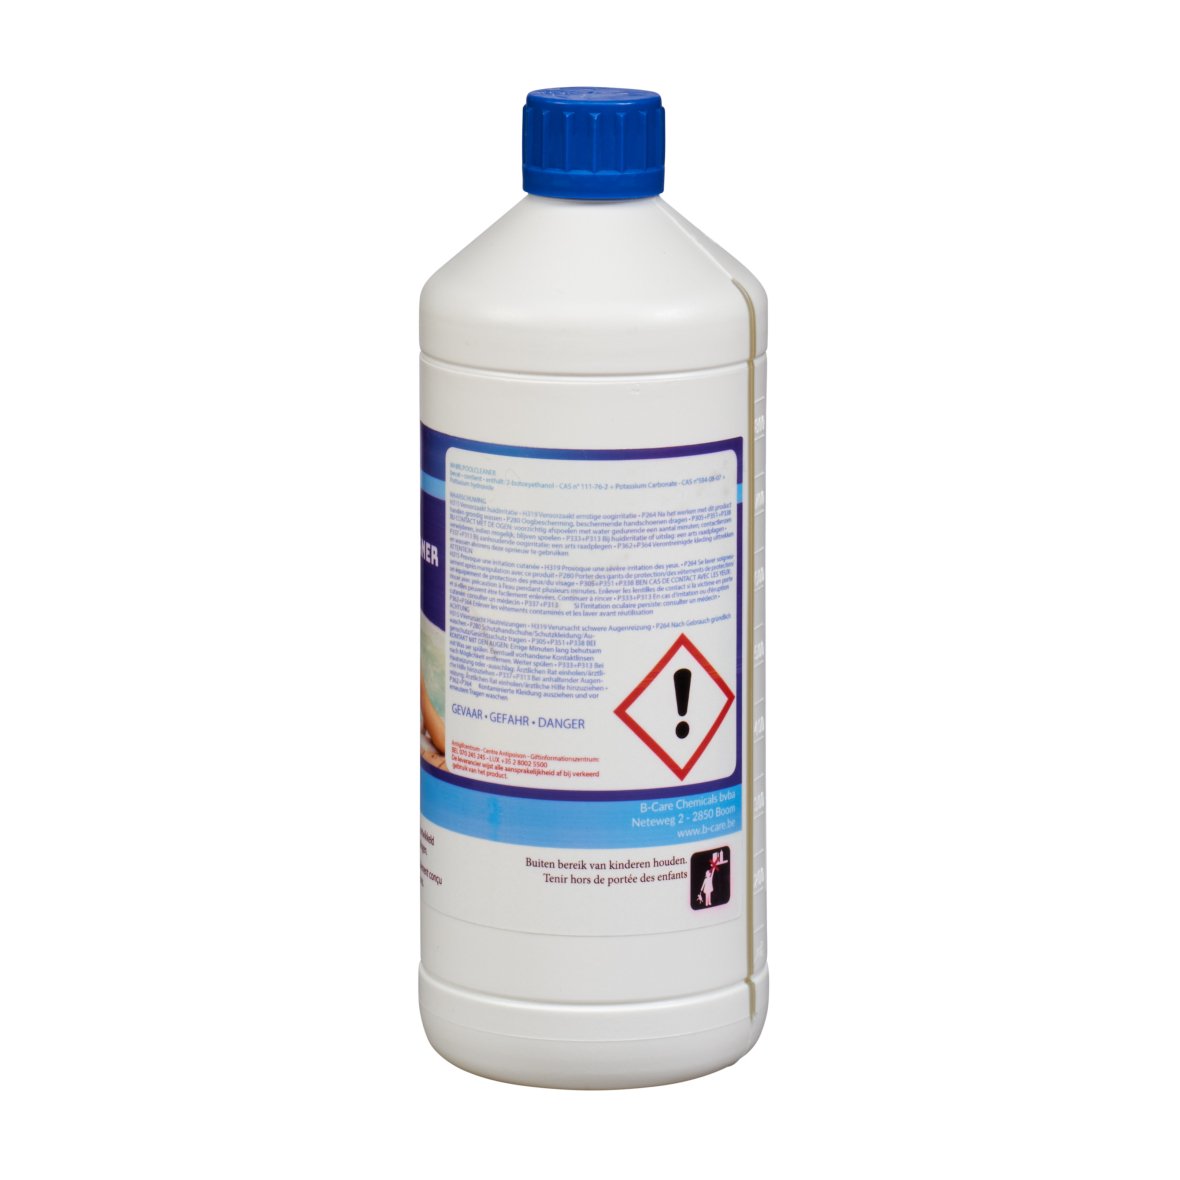 Spa Whirlpool Cleaner 1L